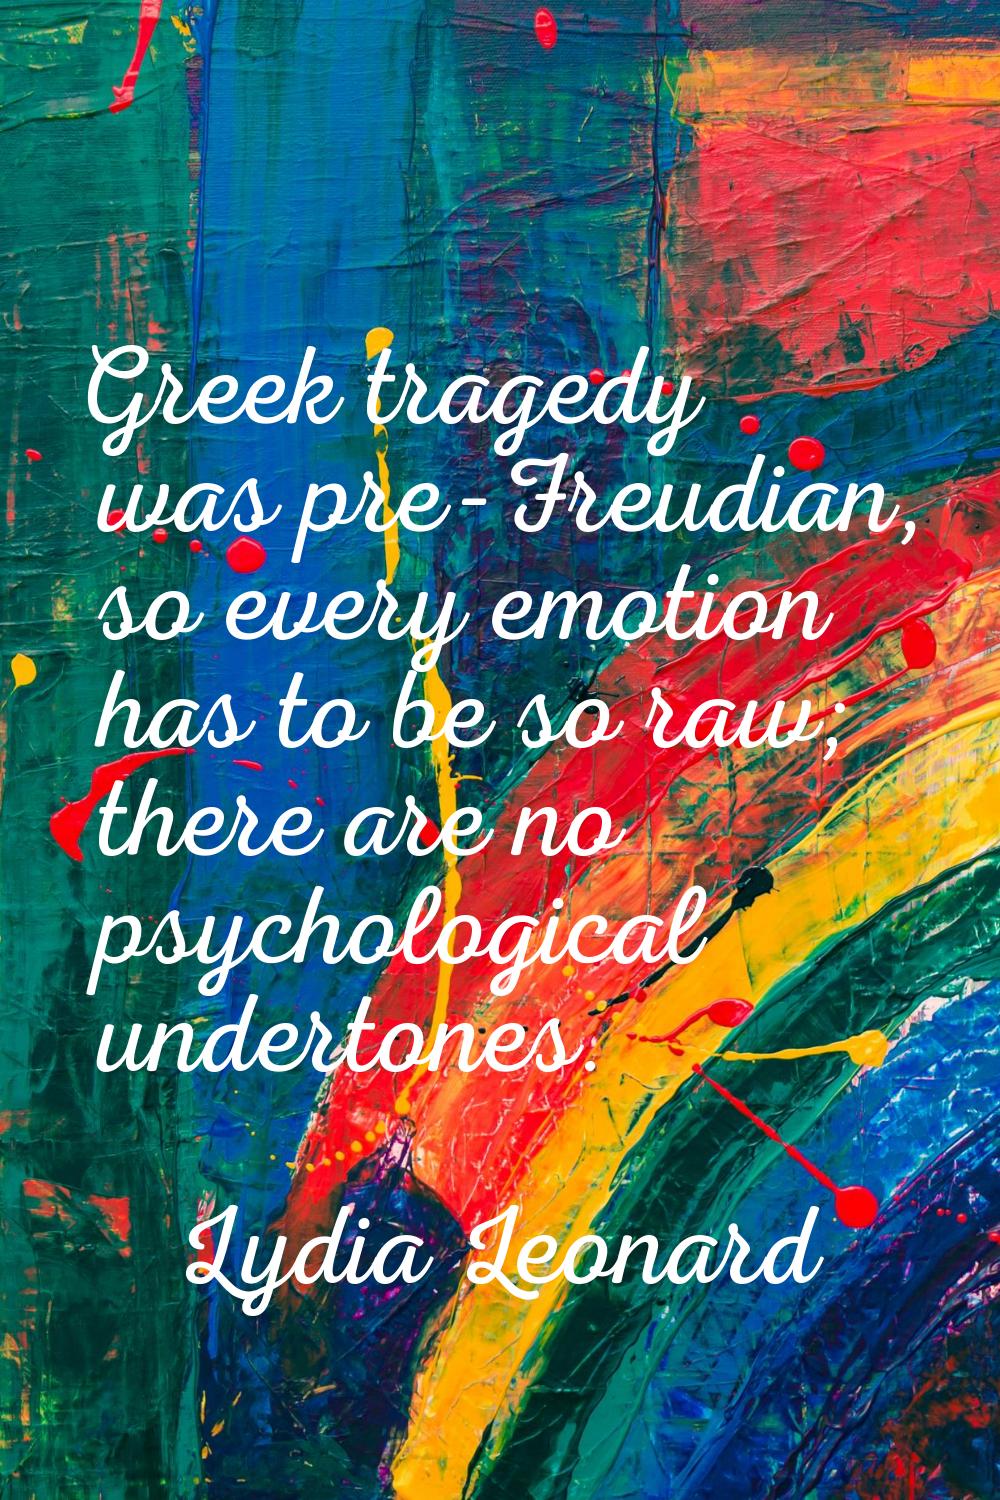 Greek tragedy was pre-Freudian, so every emotion has to be so raw; there are no psychological under